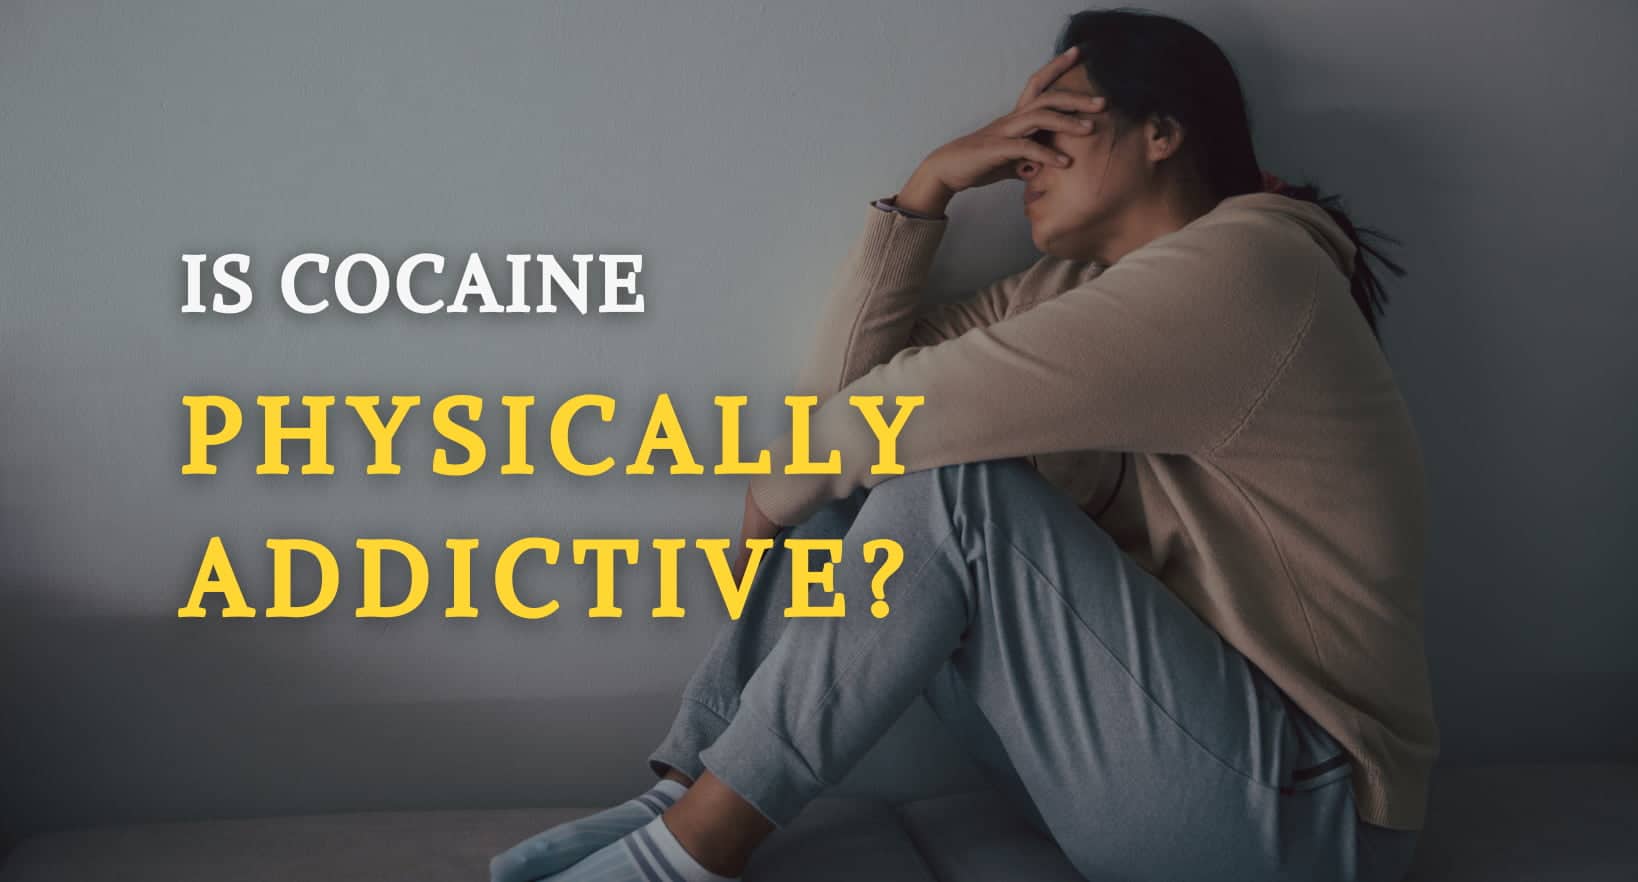 People become addicted to cocaine.